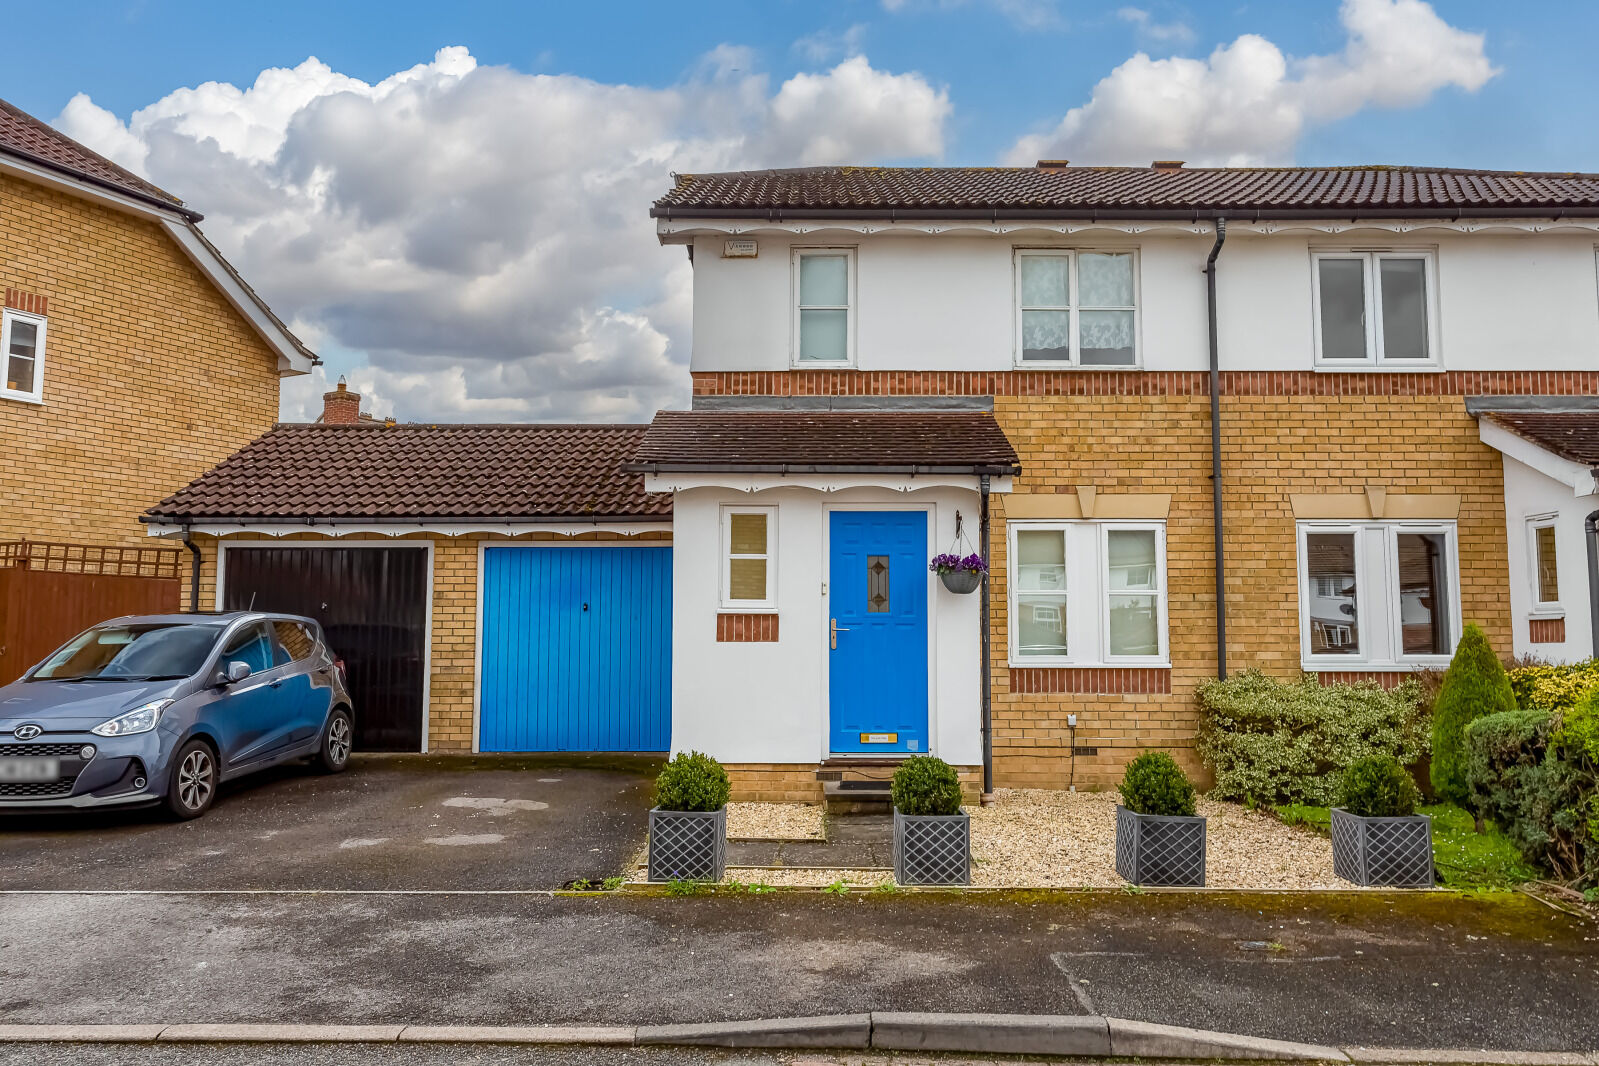 3 bedroom semi detached house for sale Chelmsford Close, Sutton, SM2, main image